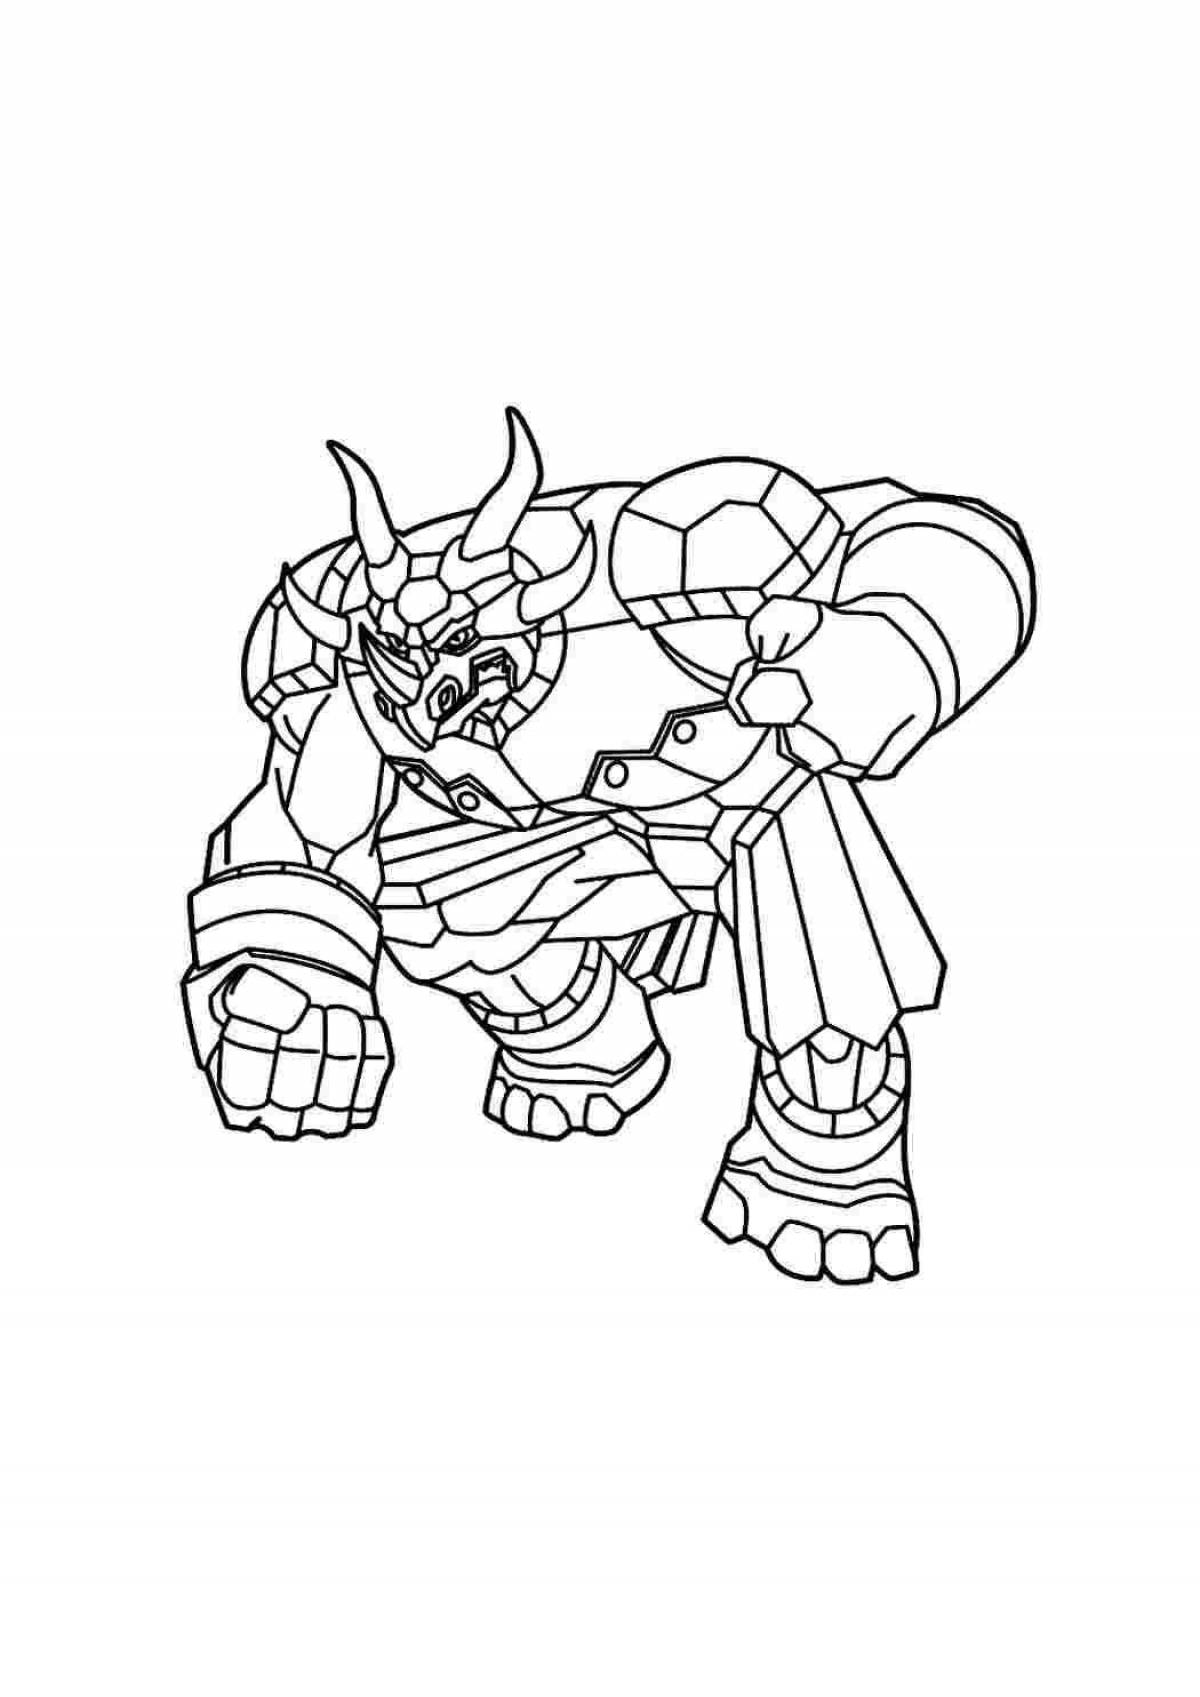 Colorful bakugan coloring page for kids